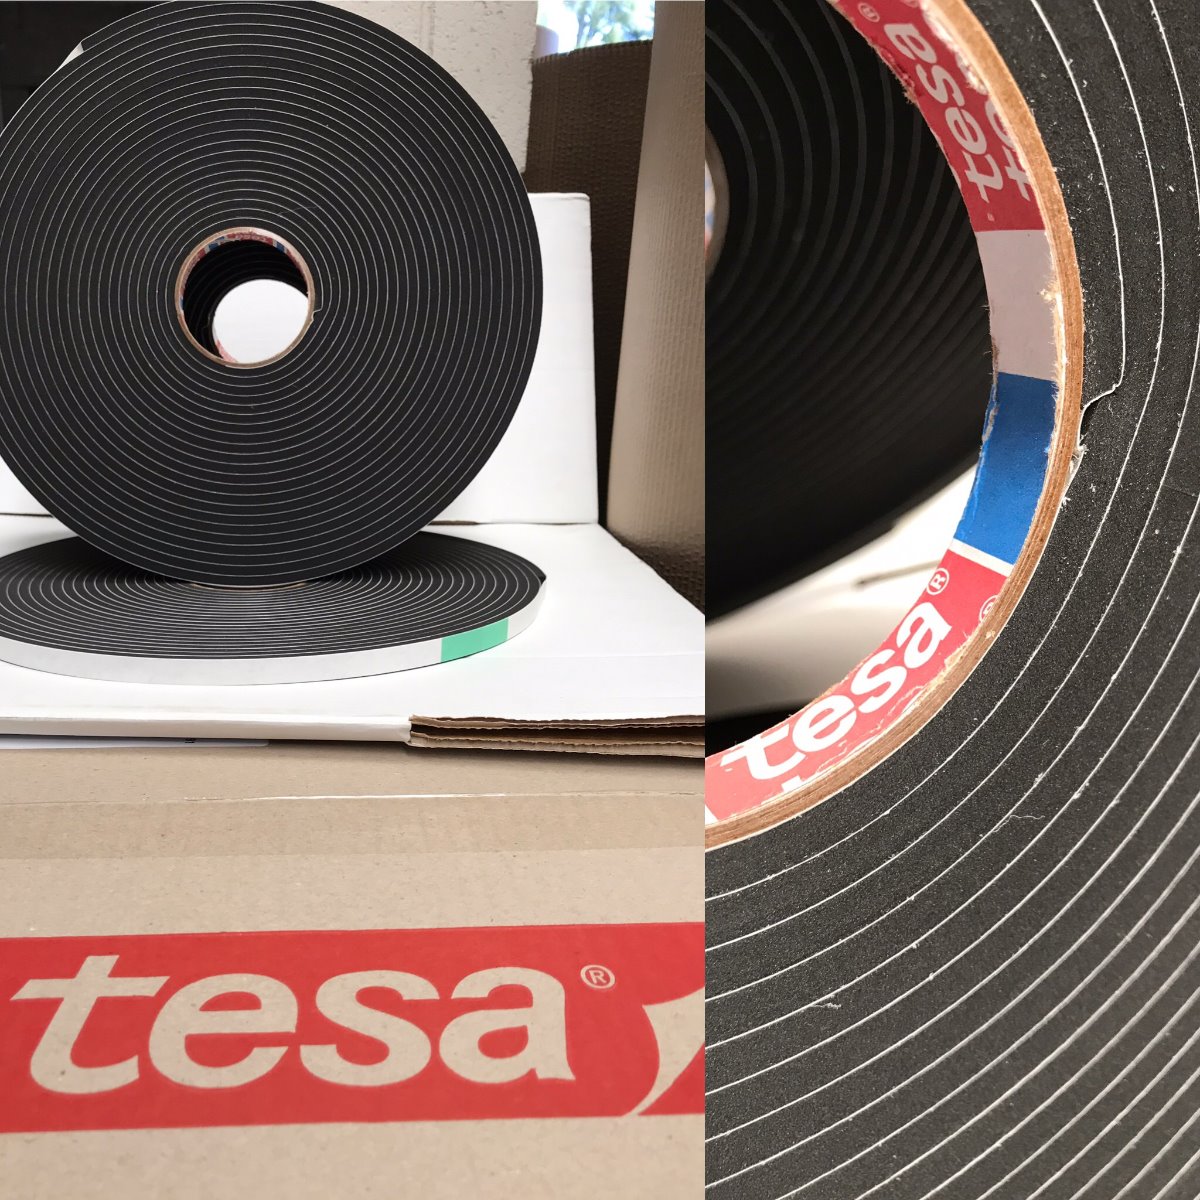 Order Tesa Tape Online Here for Delivery Australia Wide